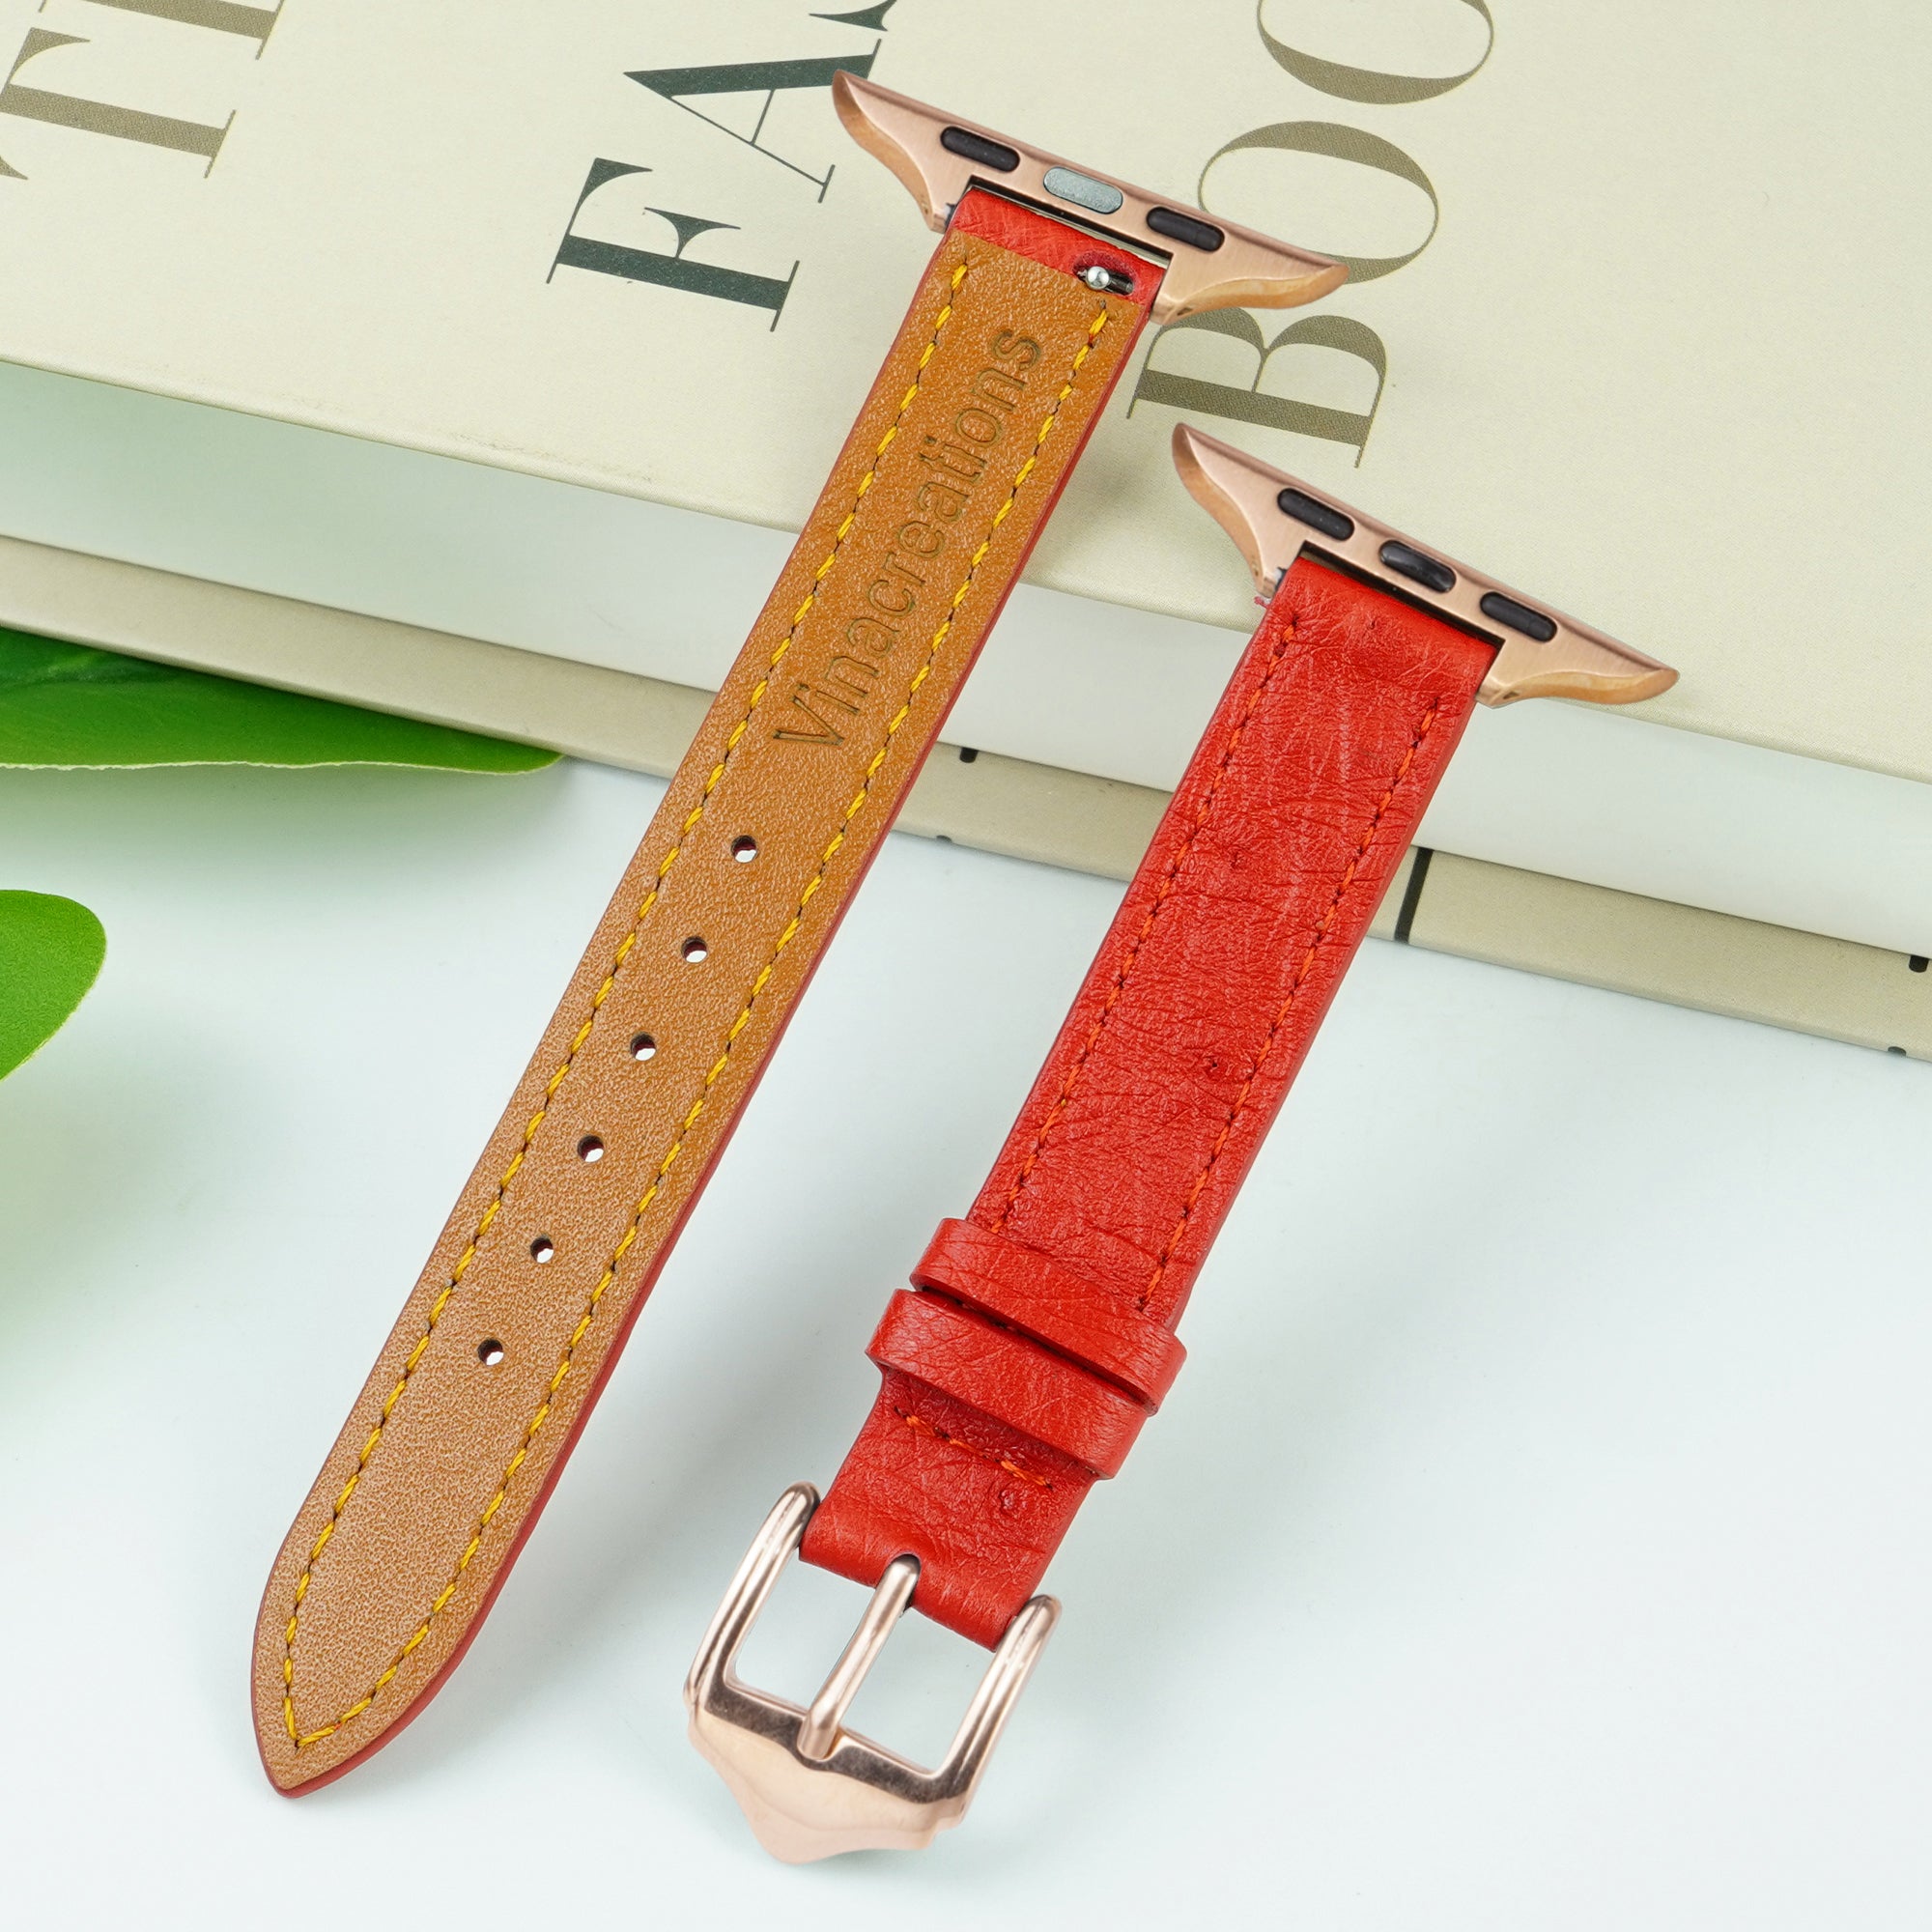 Red Flat Ostrich Leather Band Compatible Apple Watch Iwatch 42mm Screen Protector Case Gold Adapter Replacement Strap For Smartwatch Series 1 2 3 Leather Handmade AW-190G-W-42MM